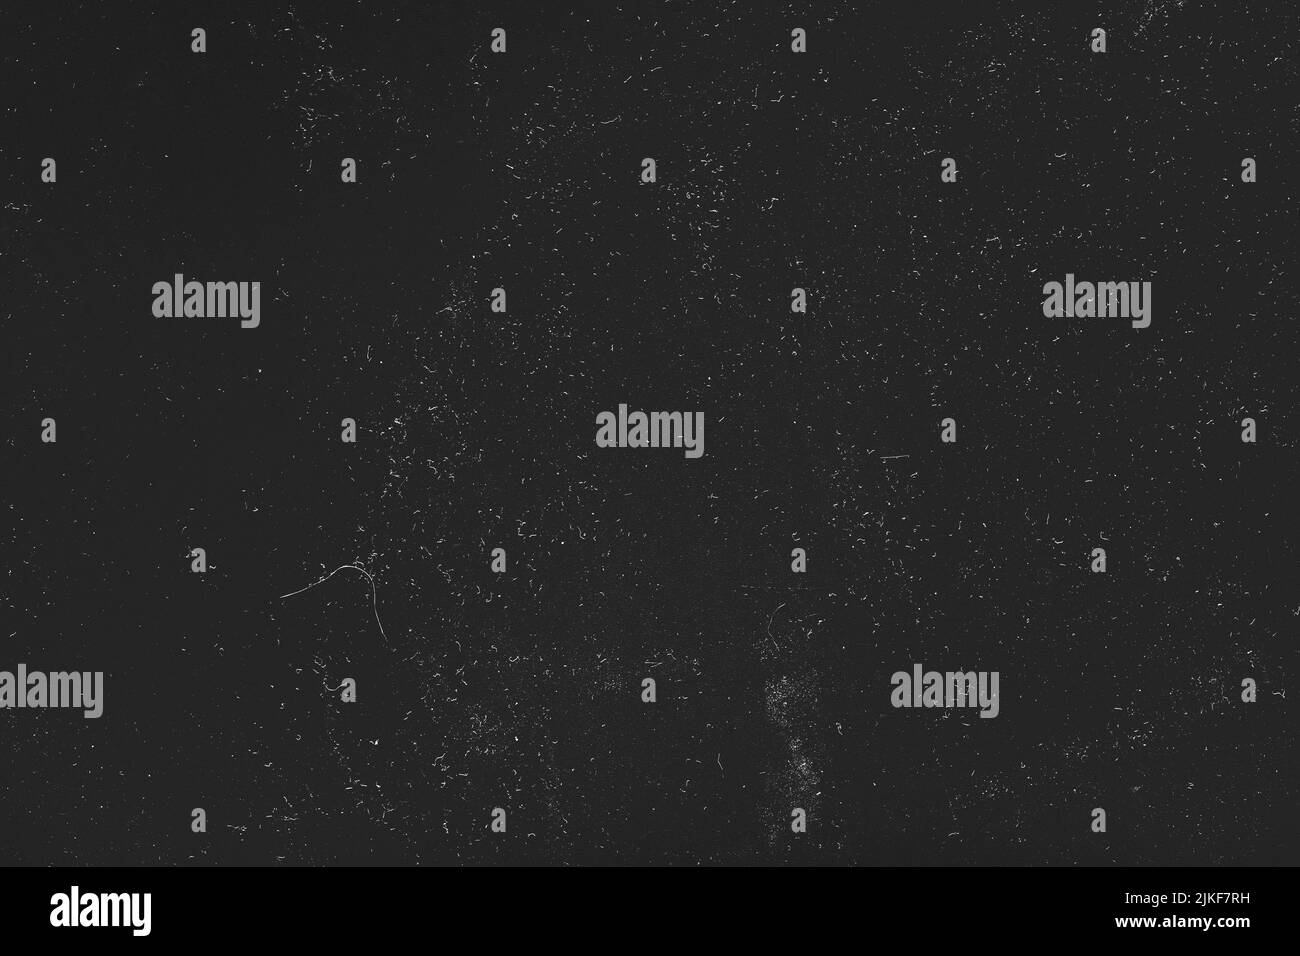 white dust scratches black abstract background Stock Photo